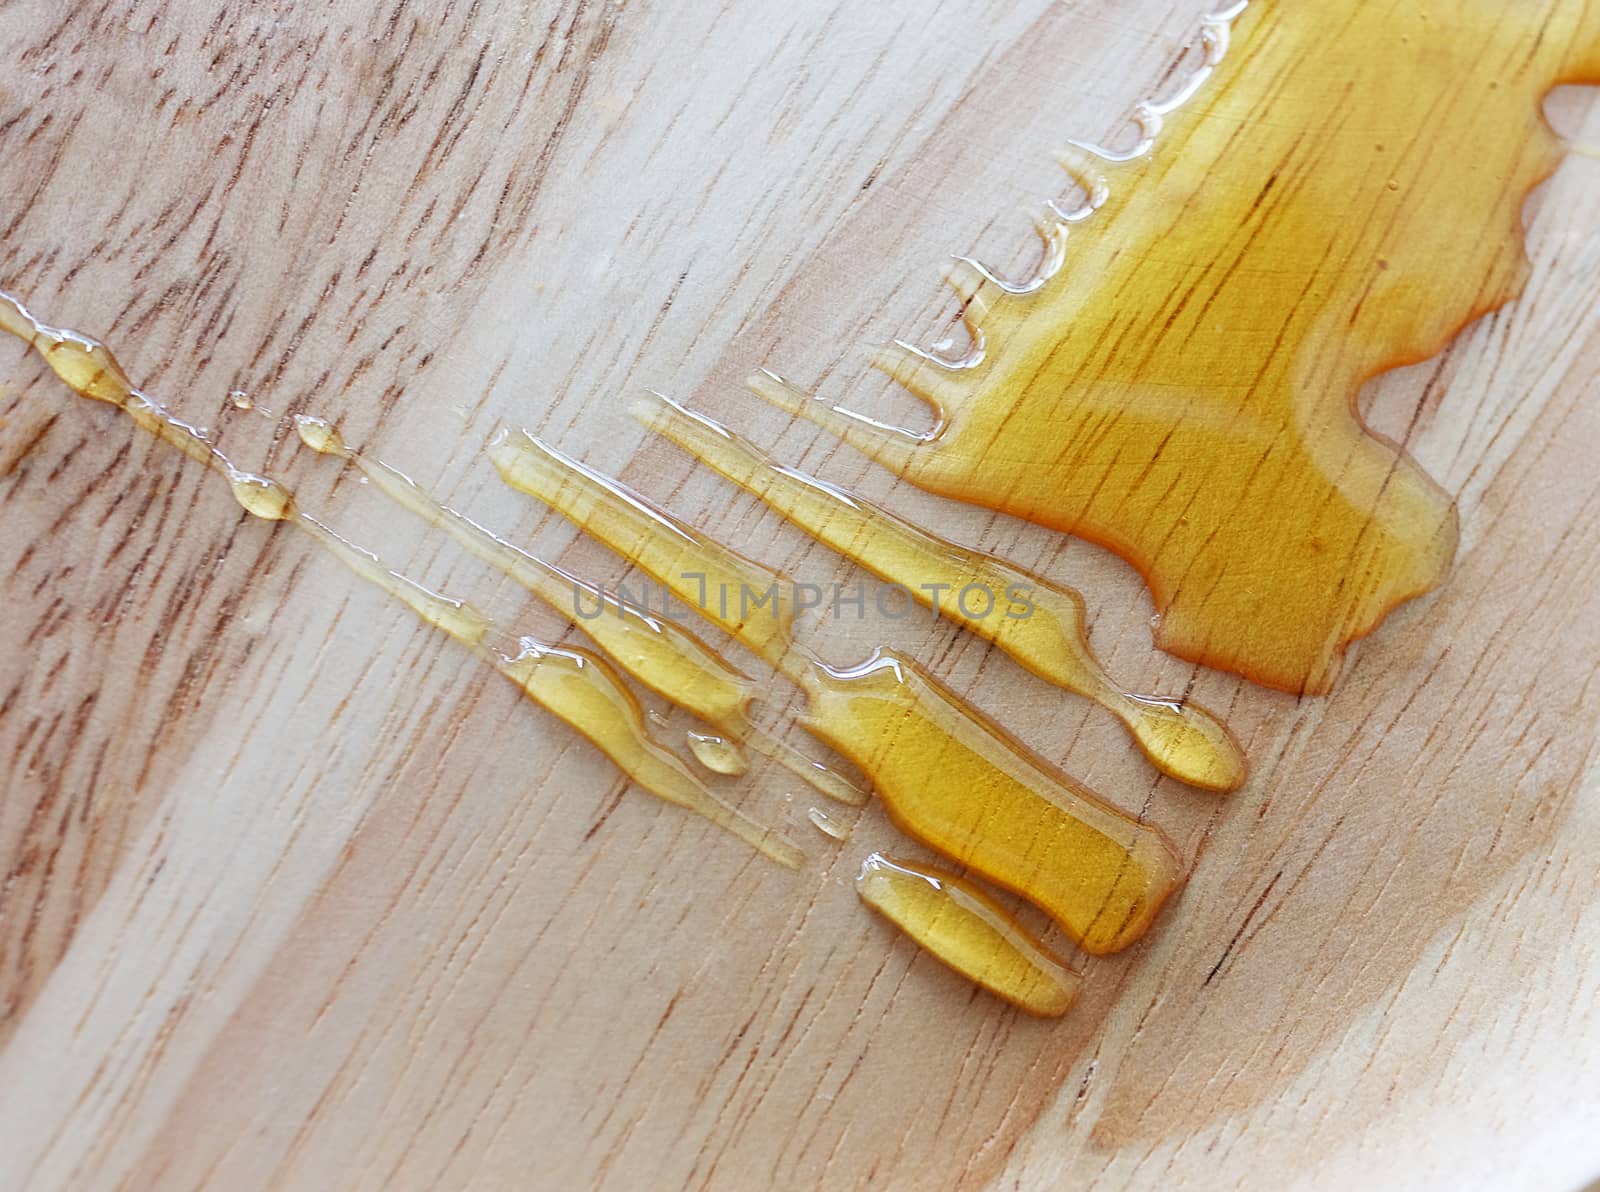 splas of honey syrup on top of a wooden table